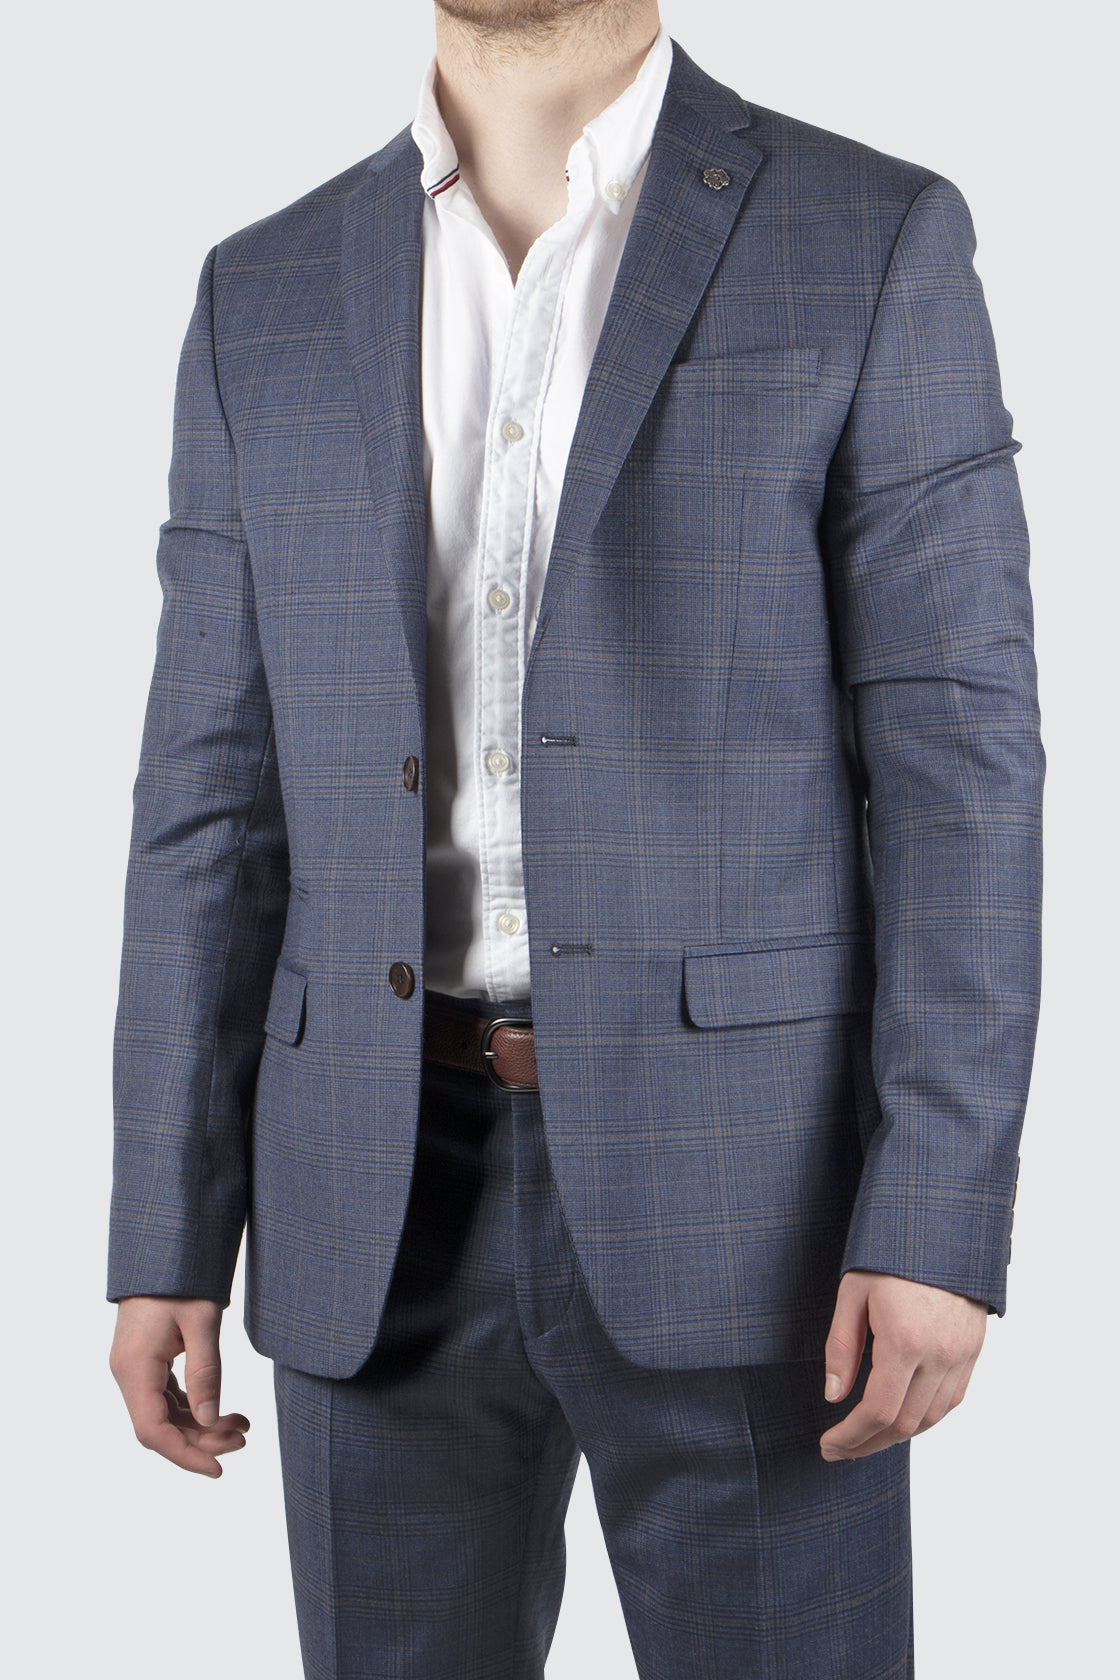 Ted Baker Rye Multi Check Suit Blue